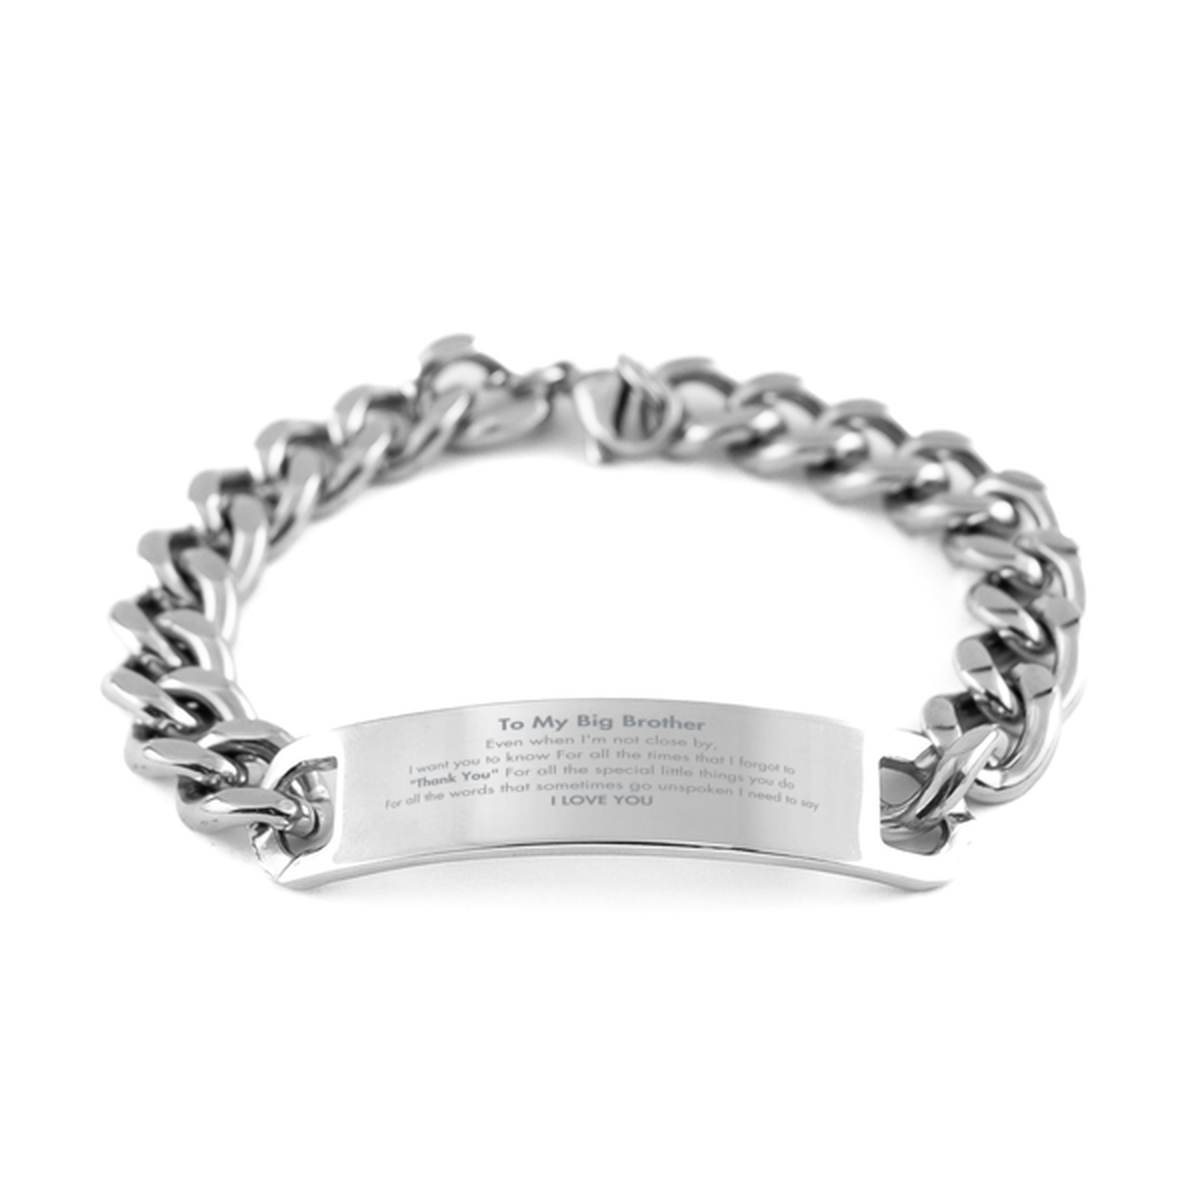 Thank You Gifts for Big Brother, Keepsake Cuban Chain Stainless Steel Bracelet Gifts for Big Brother Birthday Mother's day Father's Day Big Brother For all the words That sometimes go unspoken I need to say I LOVE YOU